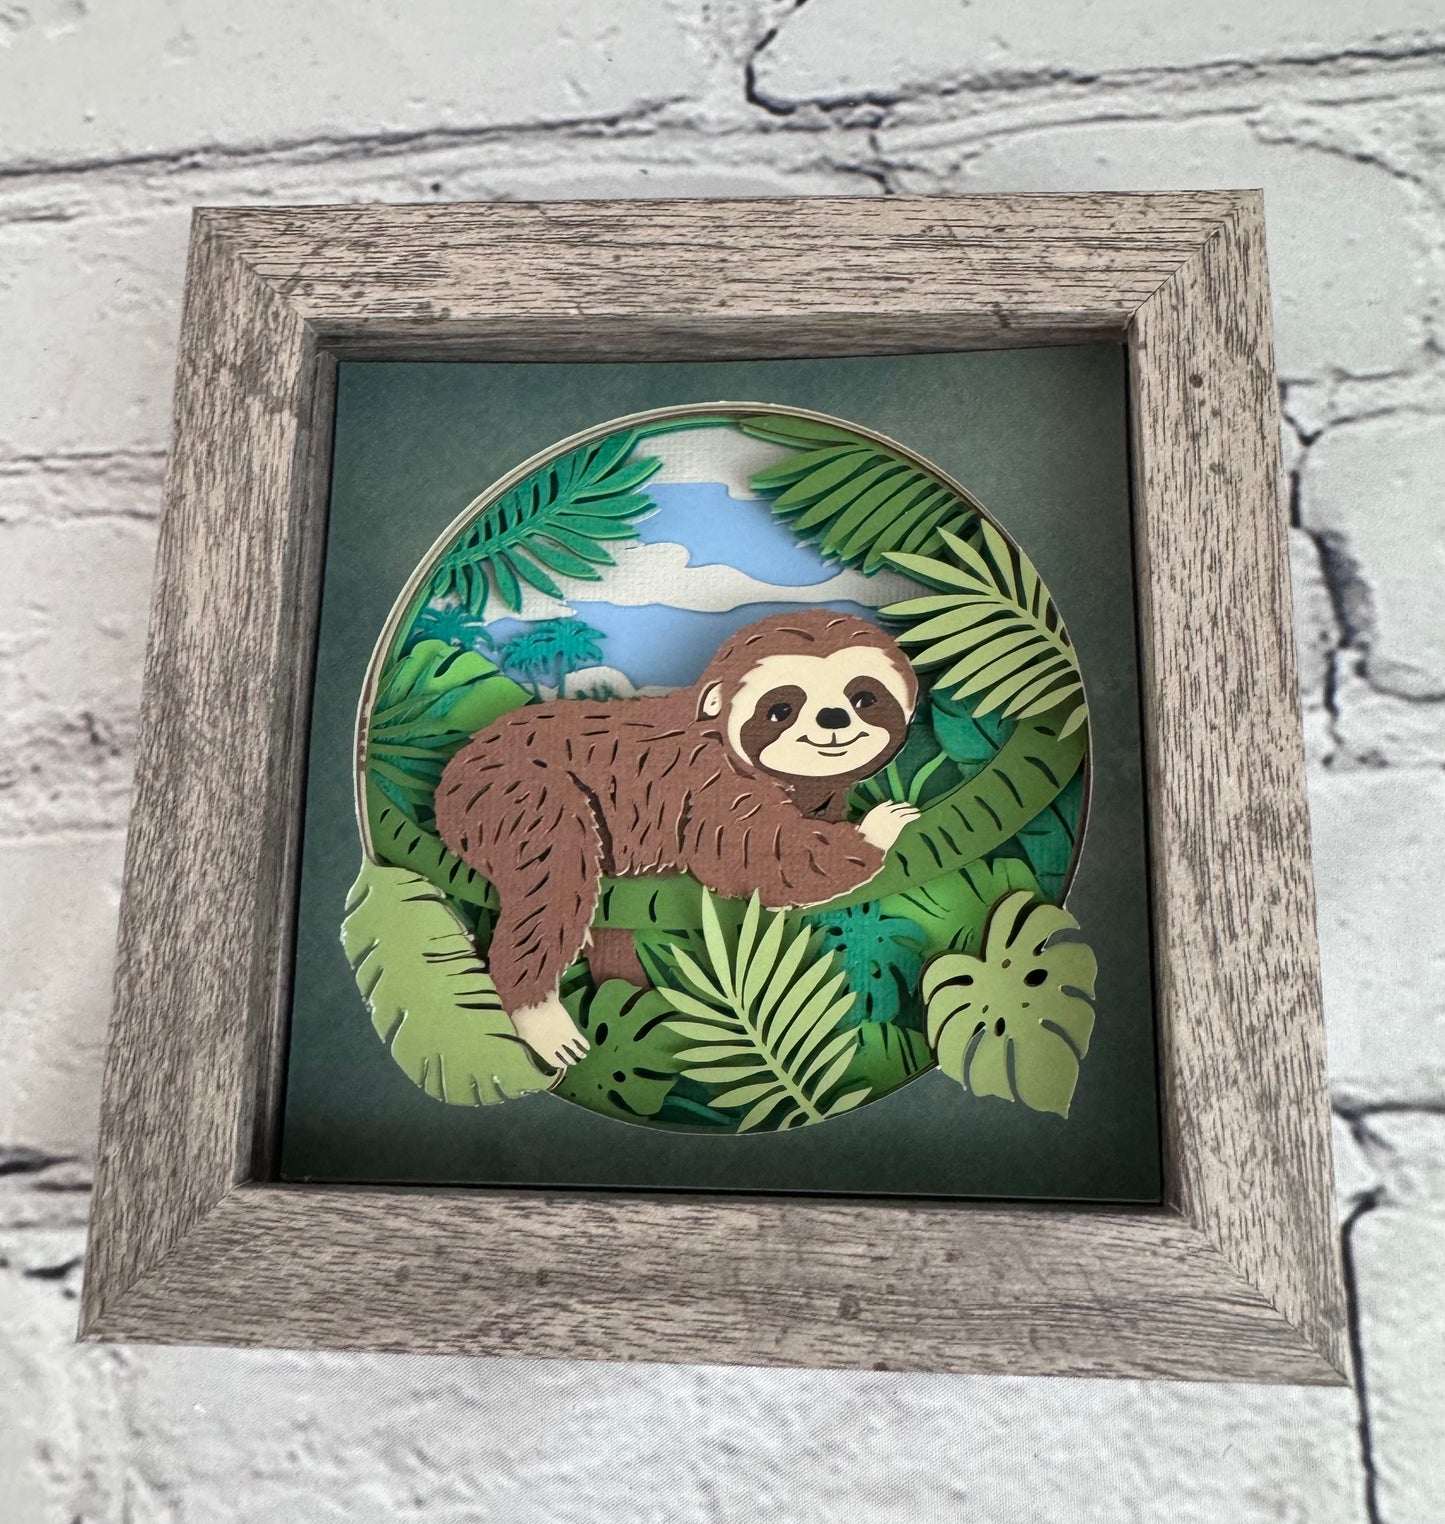 Sloth in the trees mini 3D paper art in a shadowbox